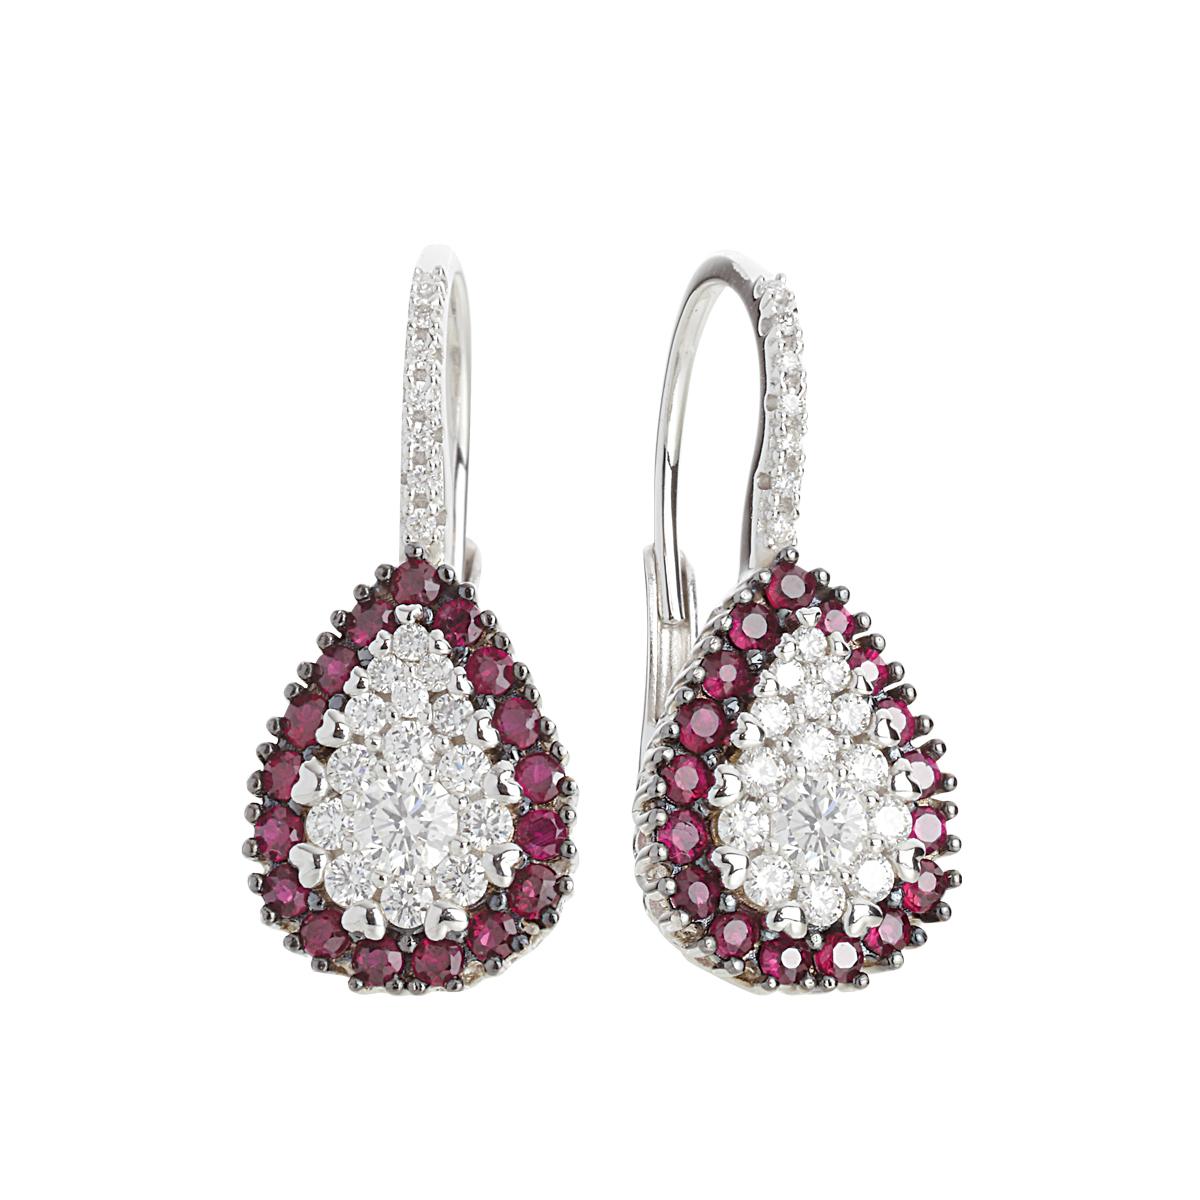 Earrings with Diamonds and Precious Stones